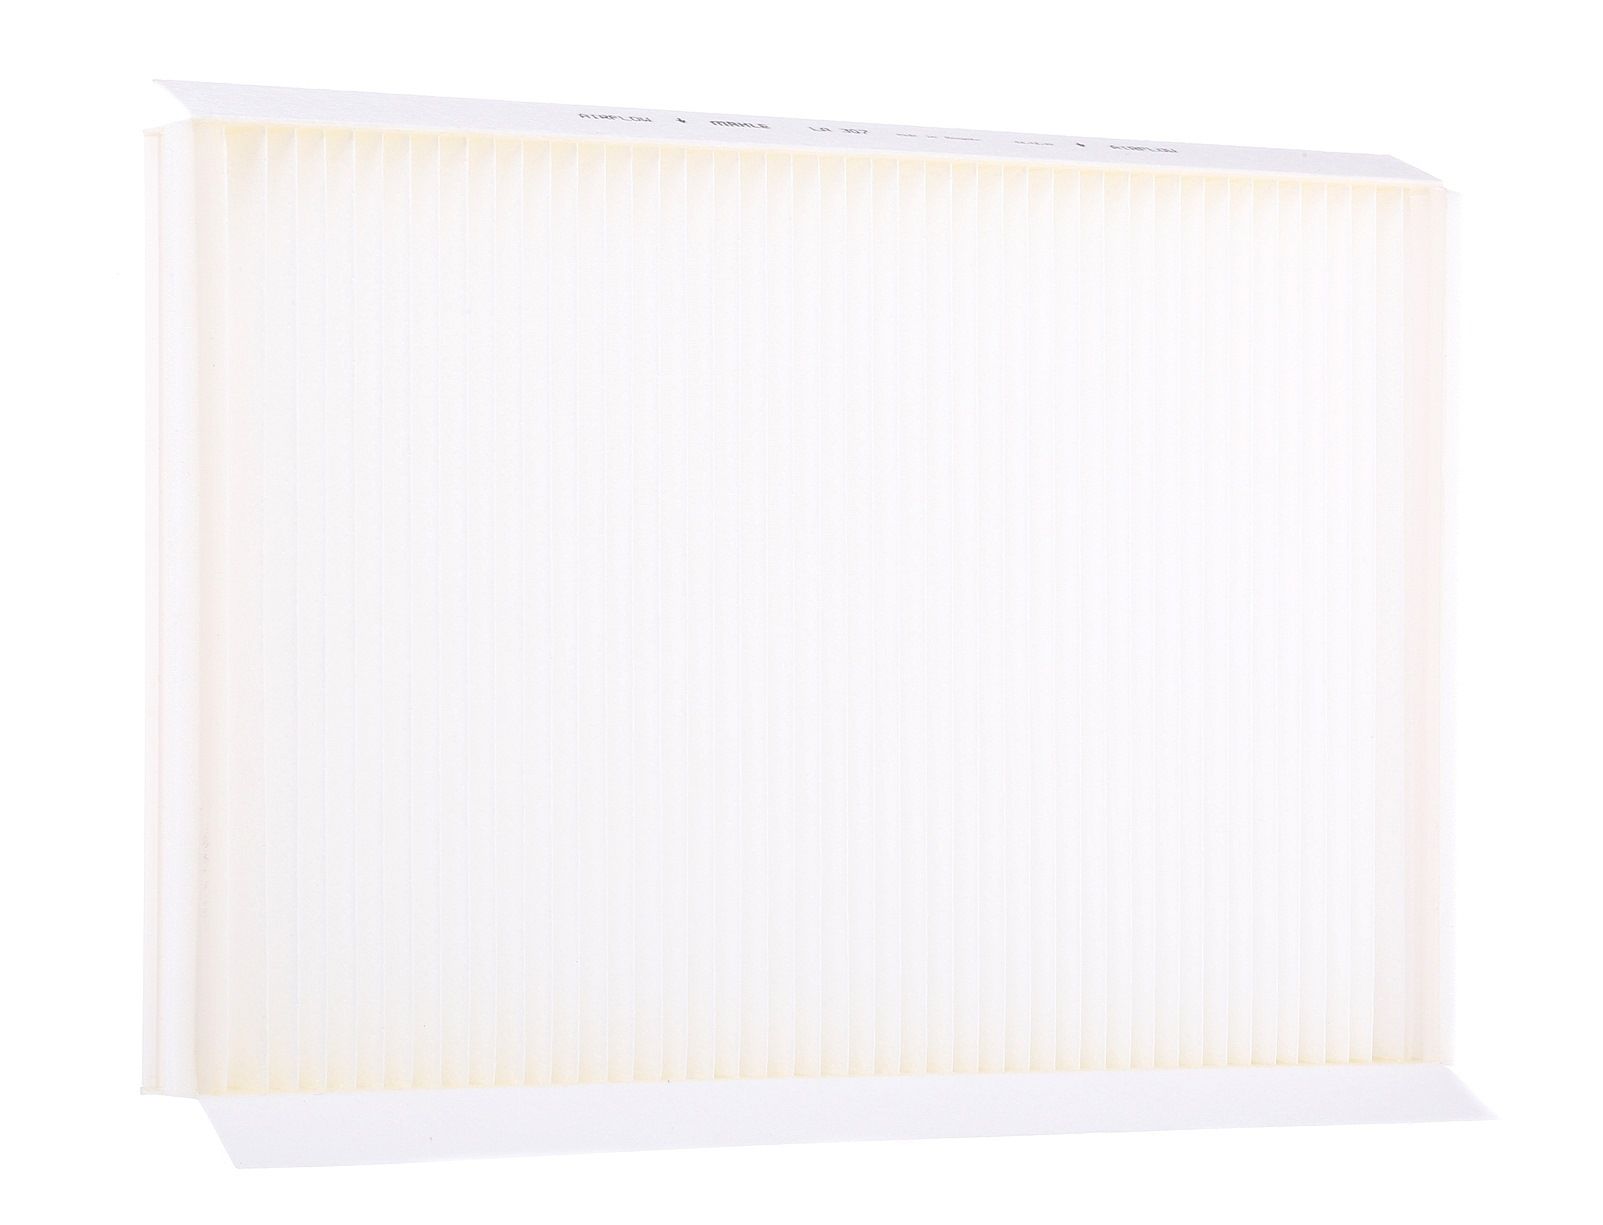 70348560 MAHLE ORIGINAL Particulate Filter, 355,0 mm x 234 mm x 35,0 mm Width: 234mm, Height: 35,0mm, Length: 355,0mm Cabin filter LA 307 buy